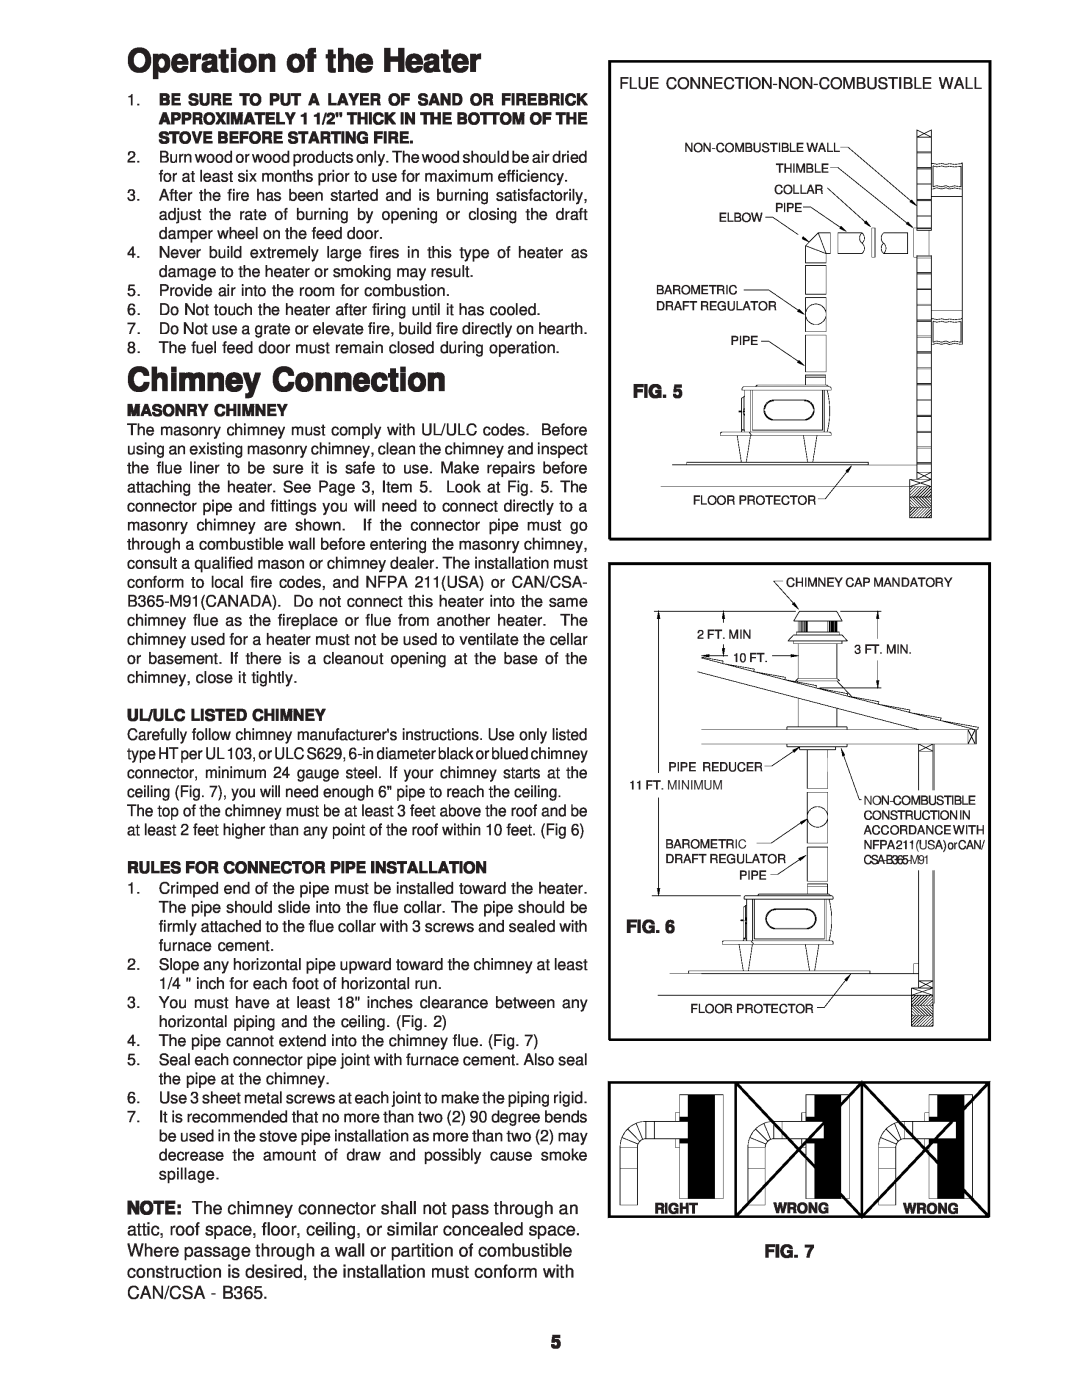 United States Stove C226 Operation of the Heater, Chimney Connection, Fig, Be Sure To Put A Layer Of Sand Or Firebrick 